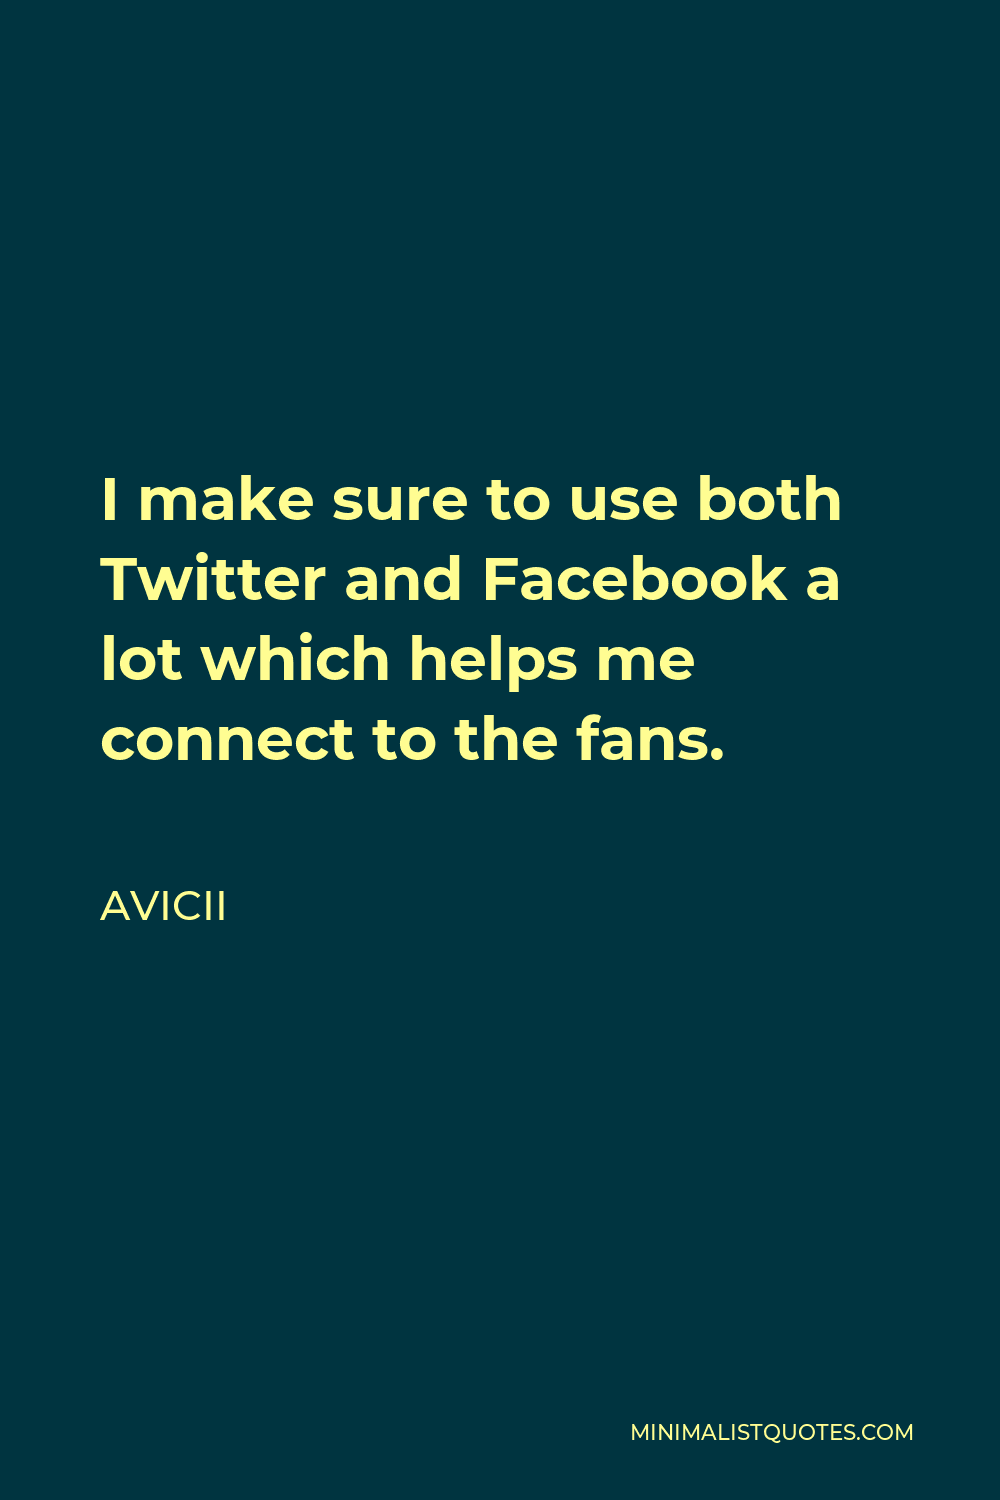 Avicii Quote - I make sure to use both Twitter and Facebook a lot which helps me connect to the fans.